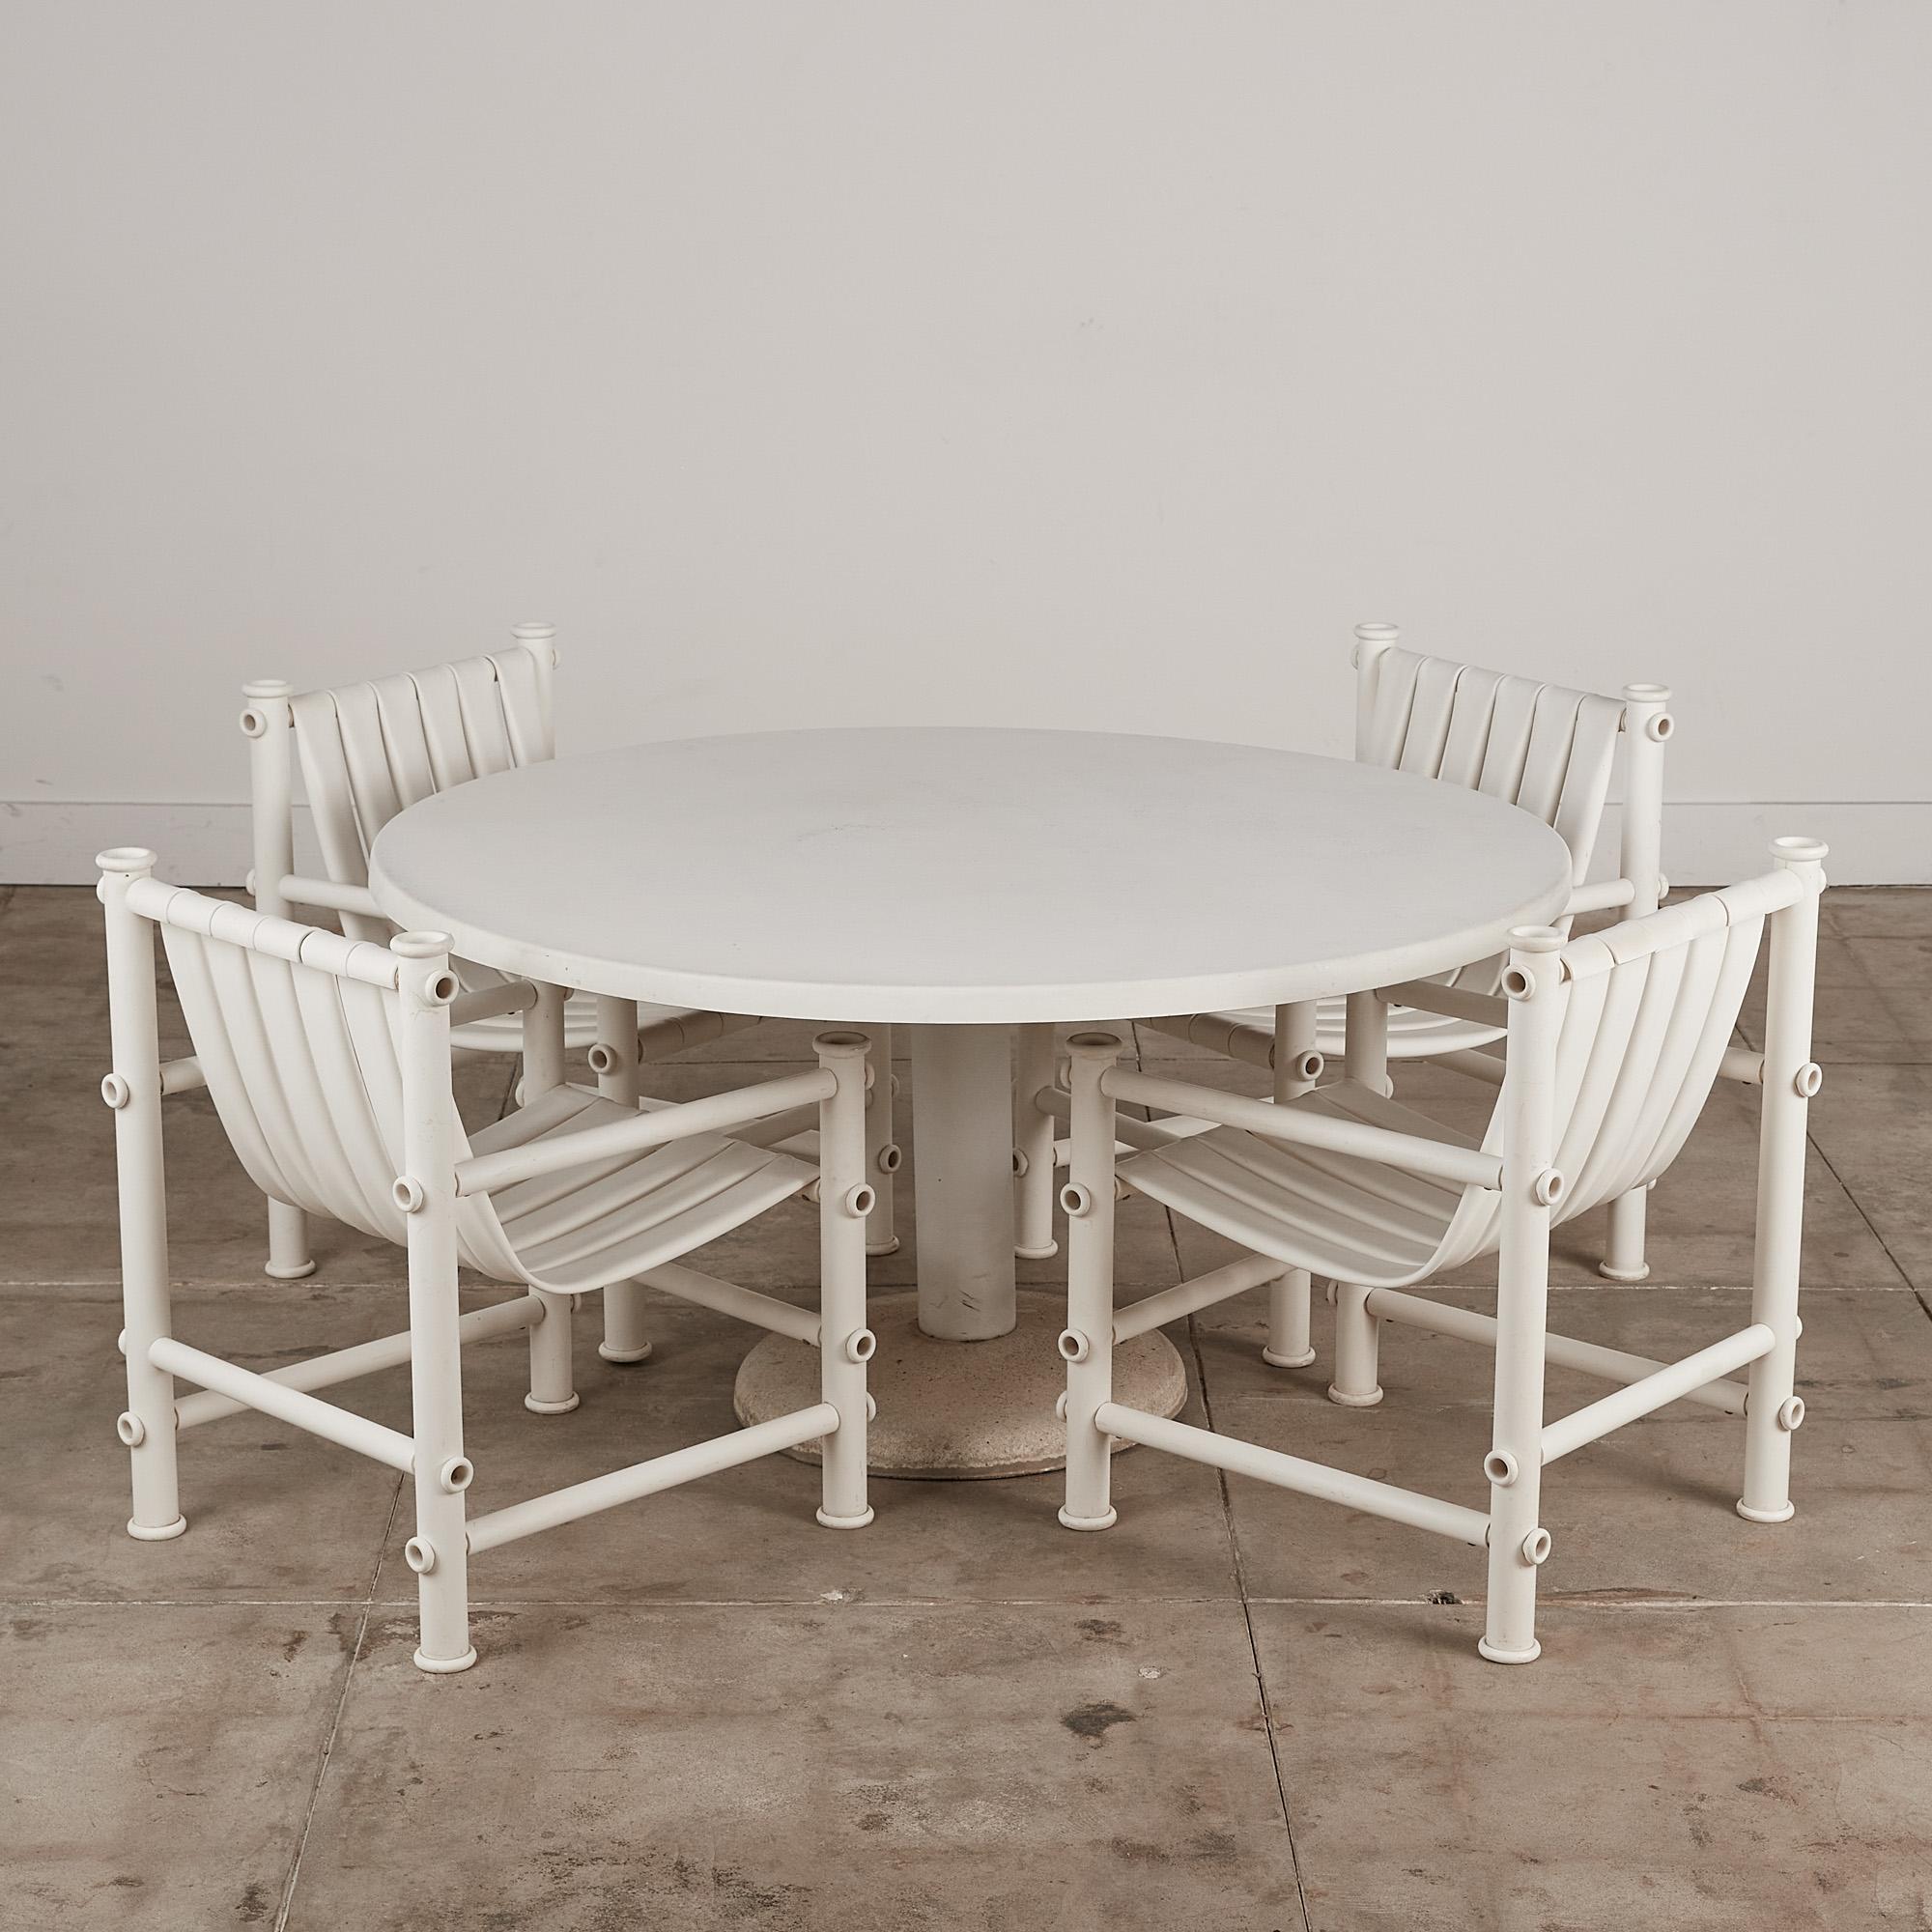 California-made dining set by Jerry Johnson for Landes Inc., c.1968. The 